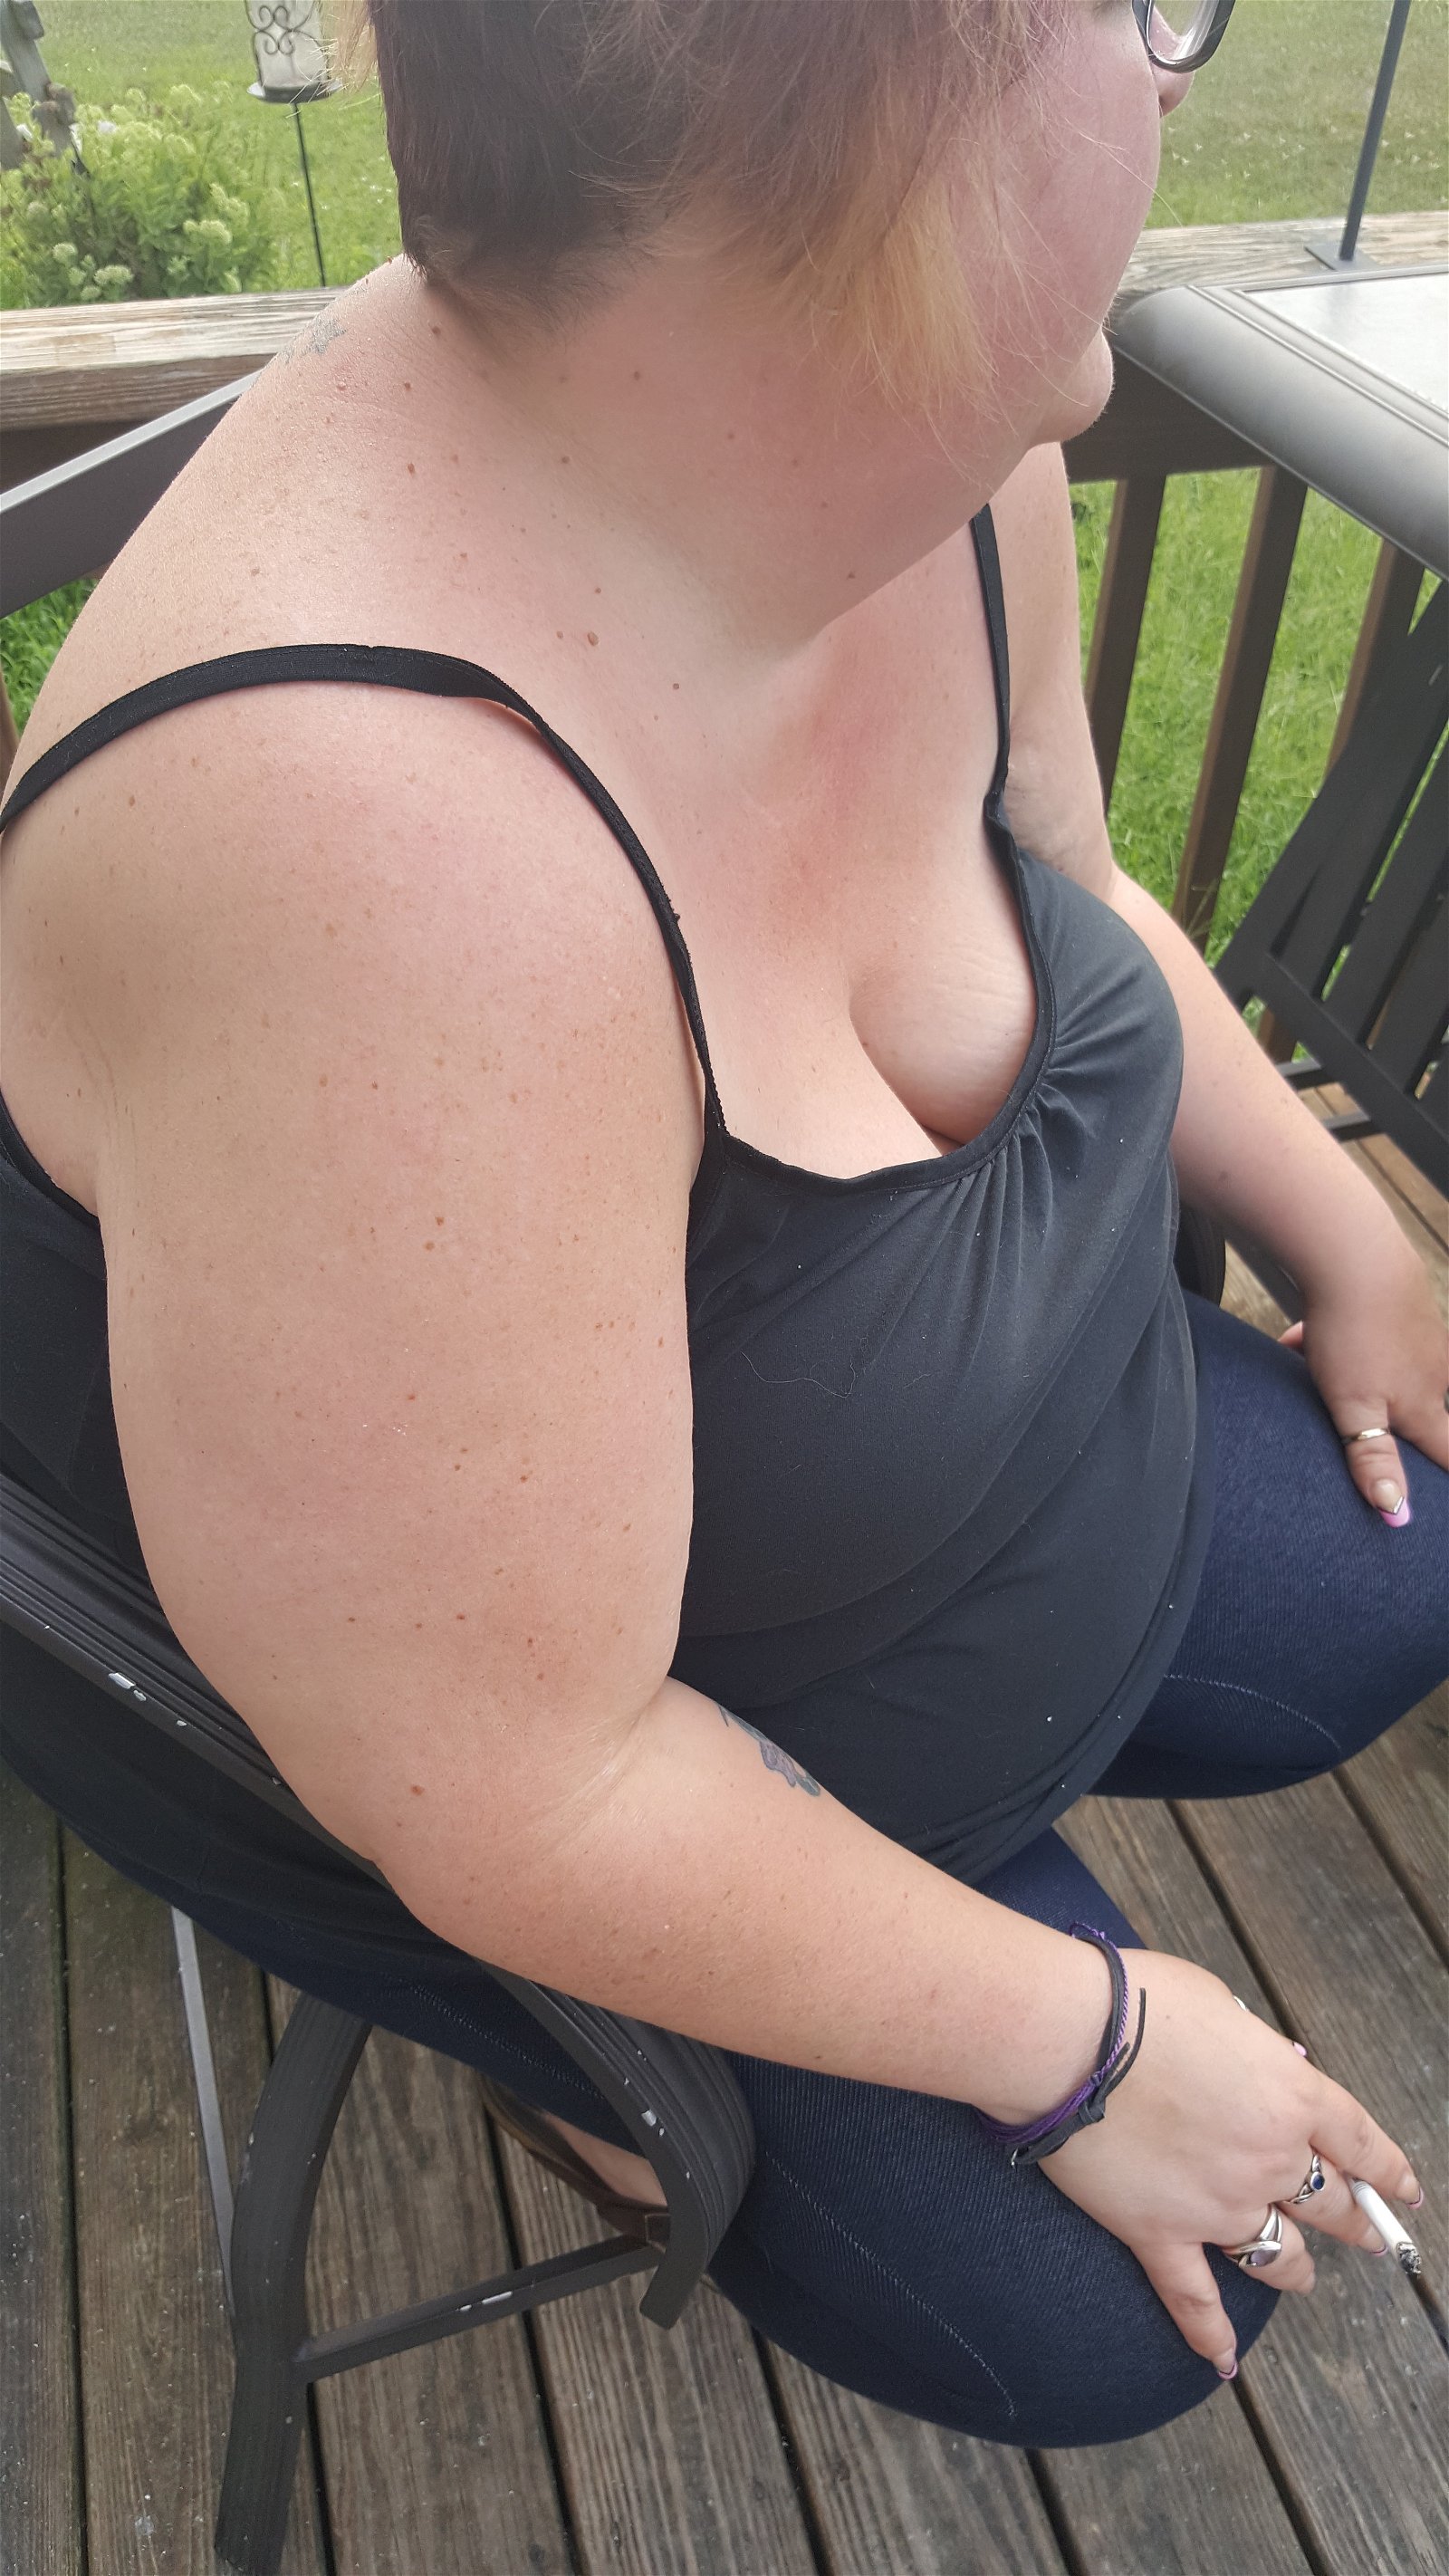 Photo by Dawn42D with the username @Dawn42D,  July 27, 2017 at 10:39 AM and the text says 'Sexy bbw wife having her morning cigarette. Look at her amazing cleavage! #smoking  #smoking  #bbw  #smoking  #wife  #sexy  #downblouse  #unaware  #wife  #smoking  #fetish  #cleavage  #big  #tits  #big  #naturals  #big  #hangers  #cigarette  #smoking..'